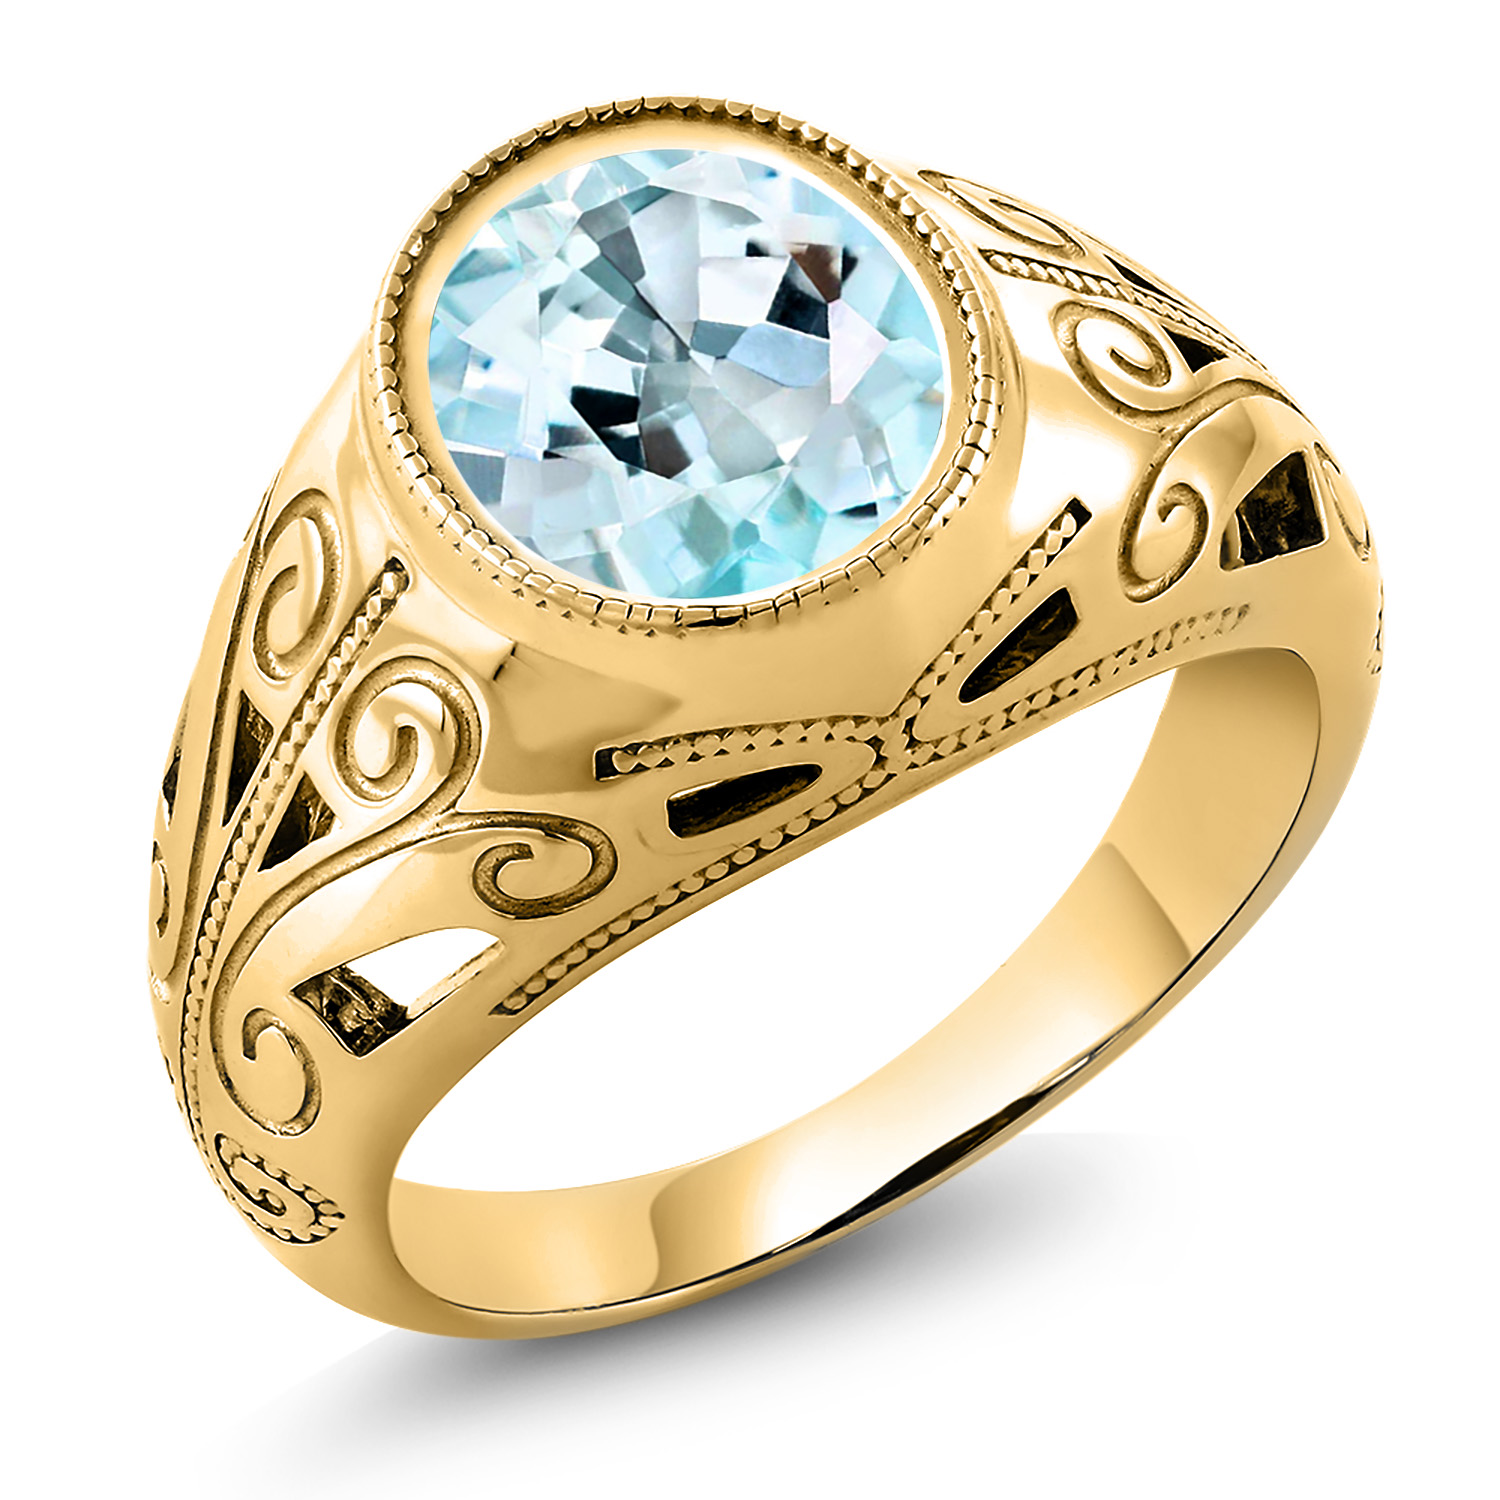 Gem Stone King 6.00 Ct Oval Sky Blue Topaz 18K Yellow Gold Plated Silver Men's Ring